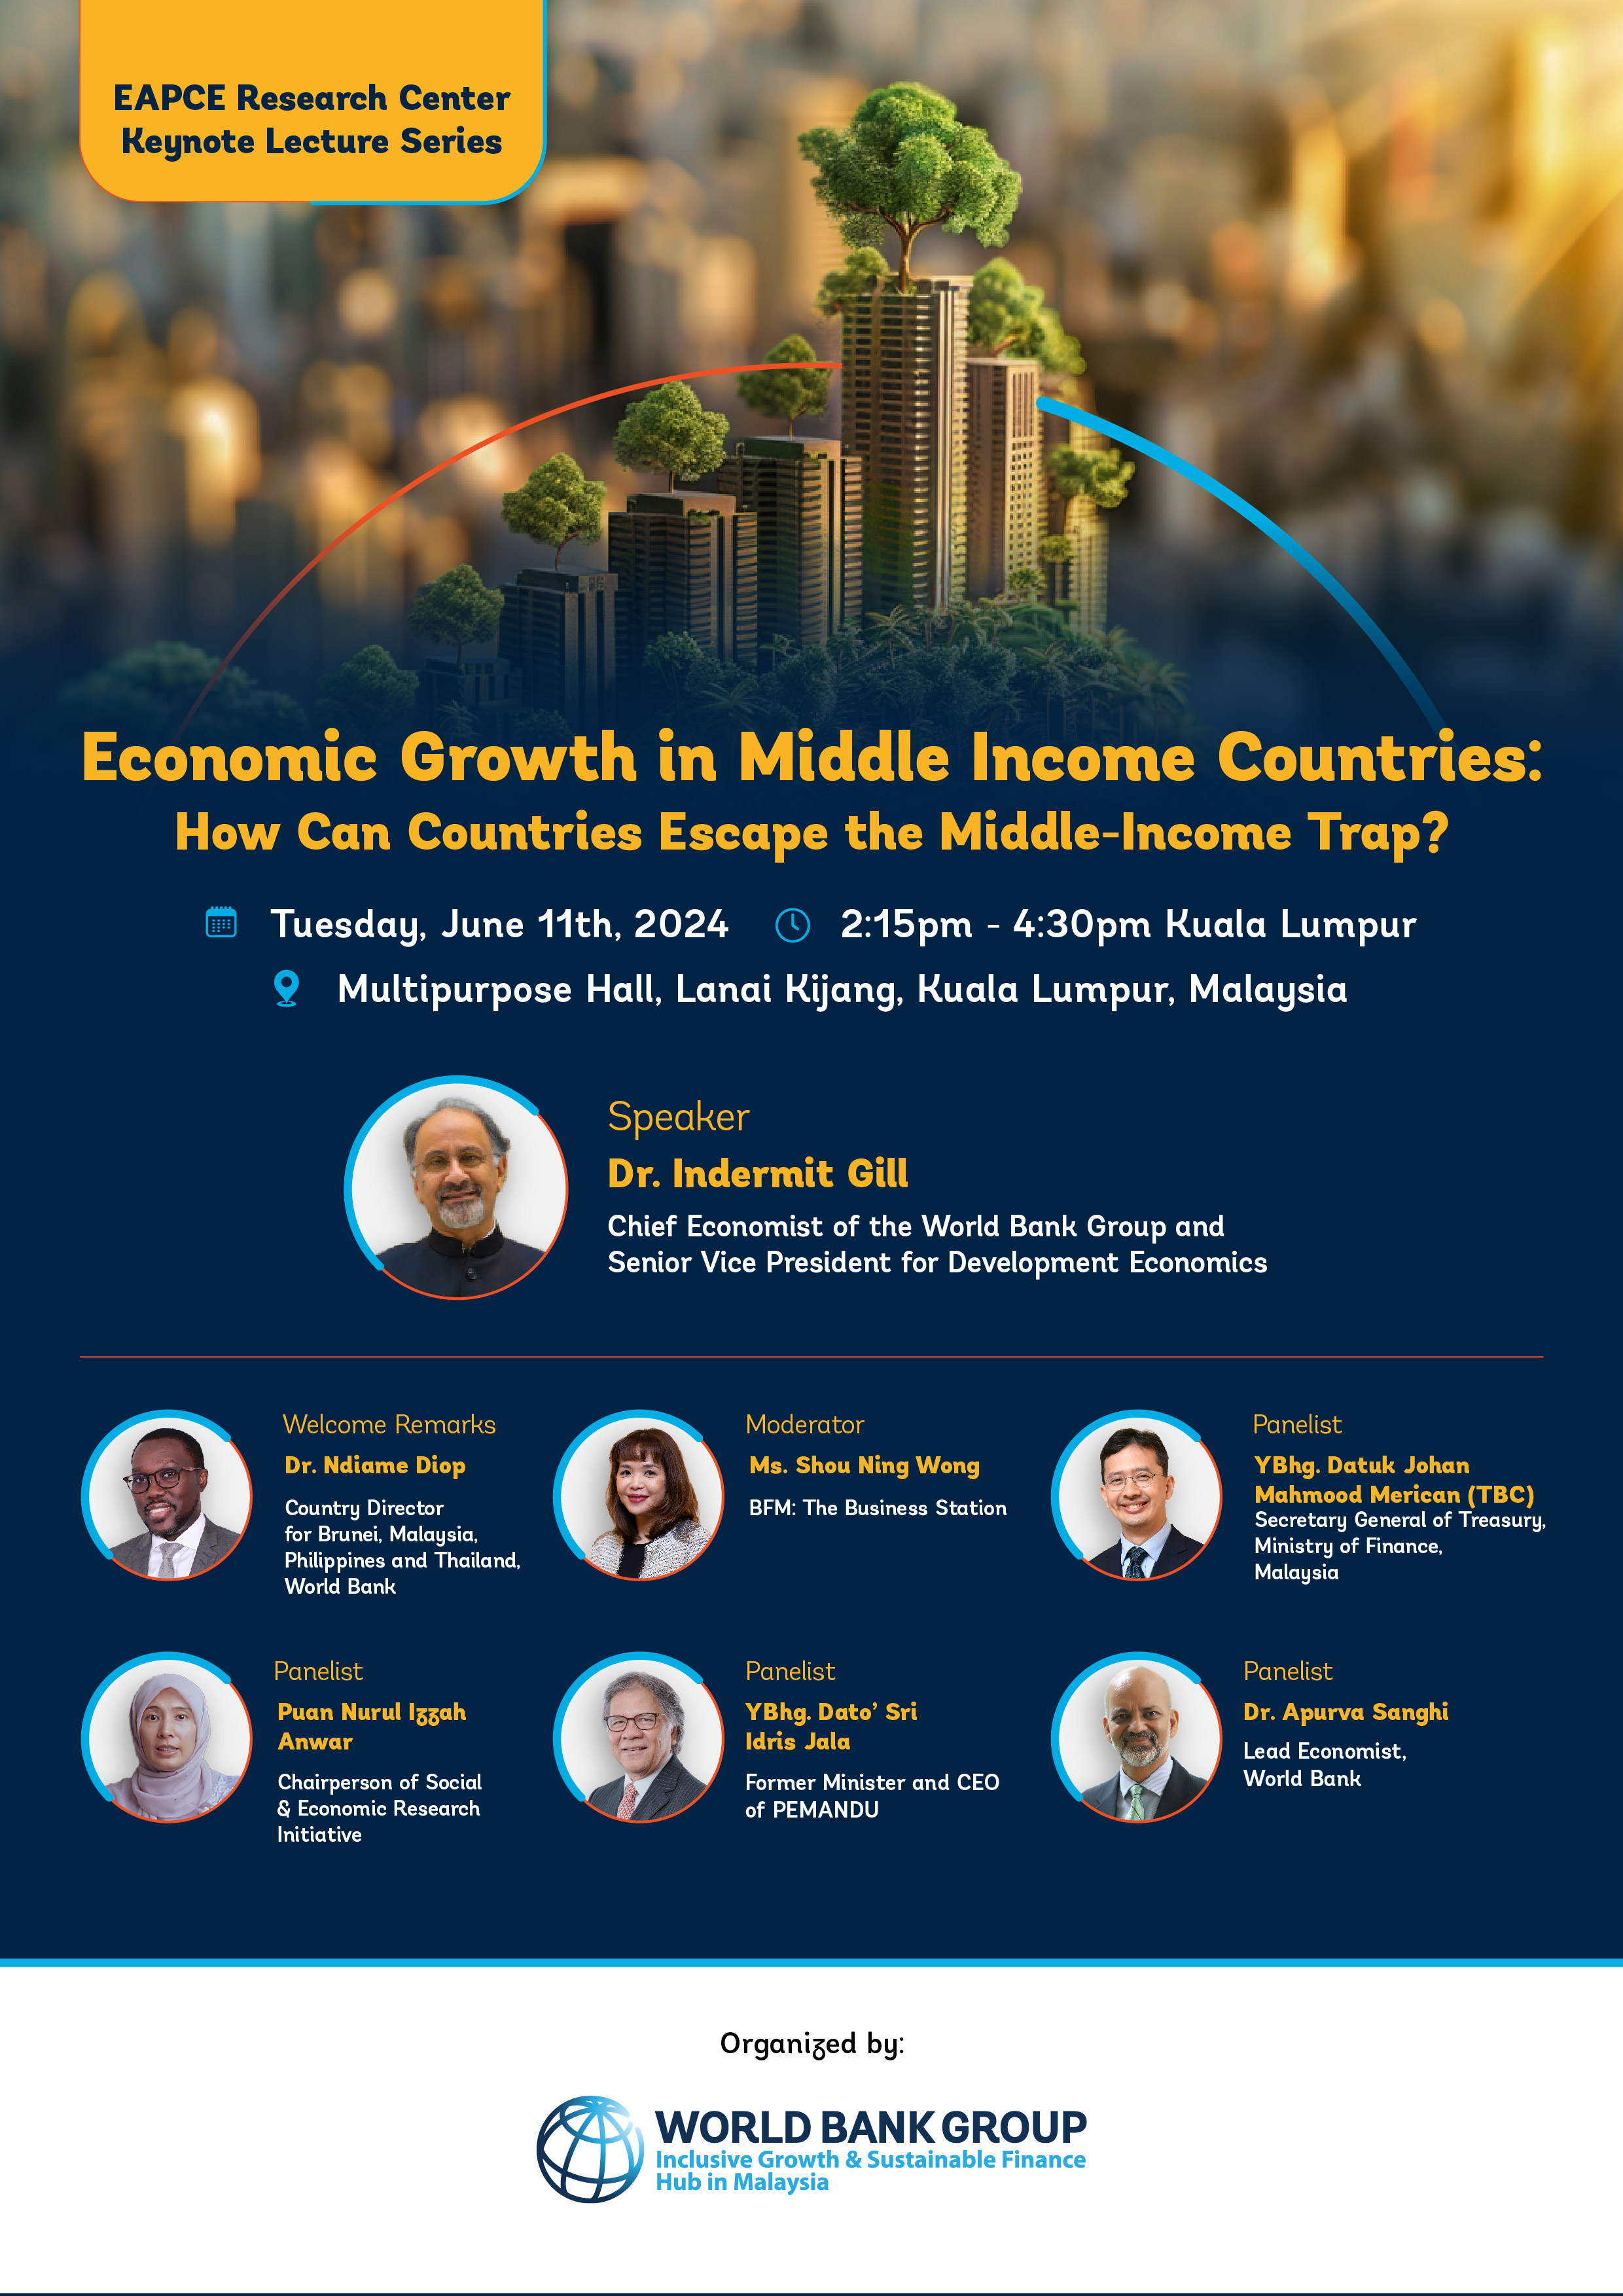 Keynote Lecture: Economic Growth in Middle Income Countries: How Can Countries Escape the Middle-Income Trap?